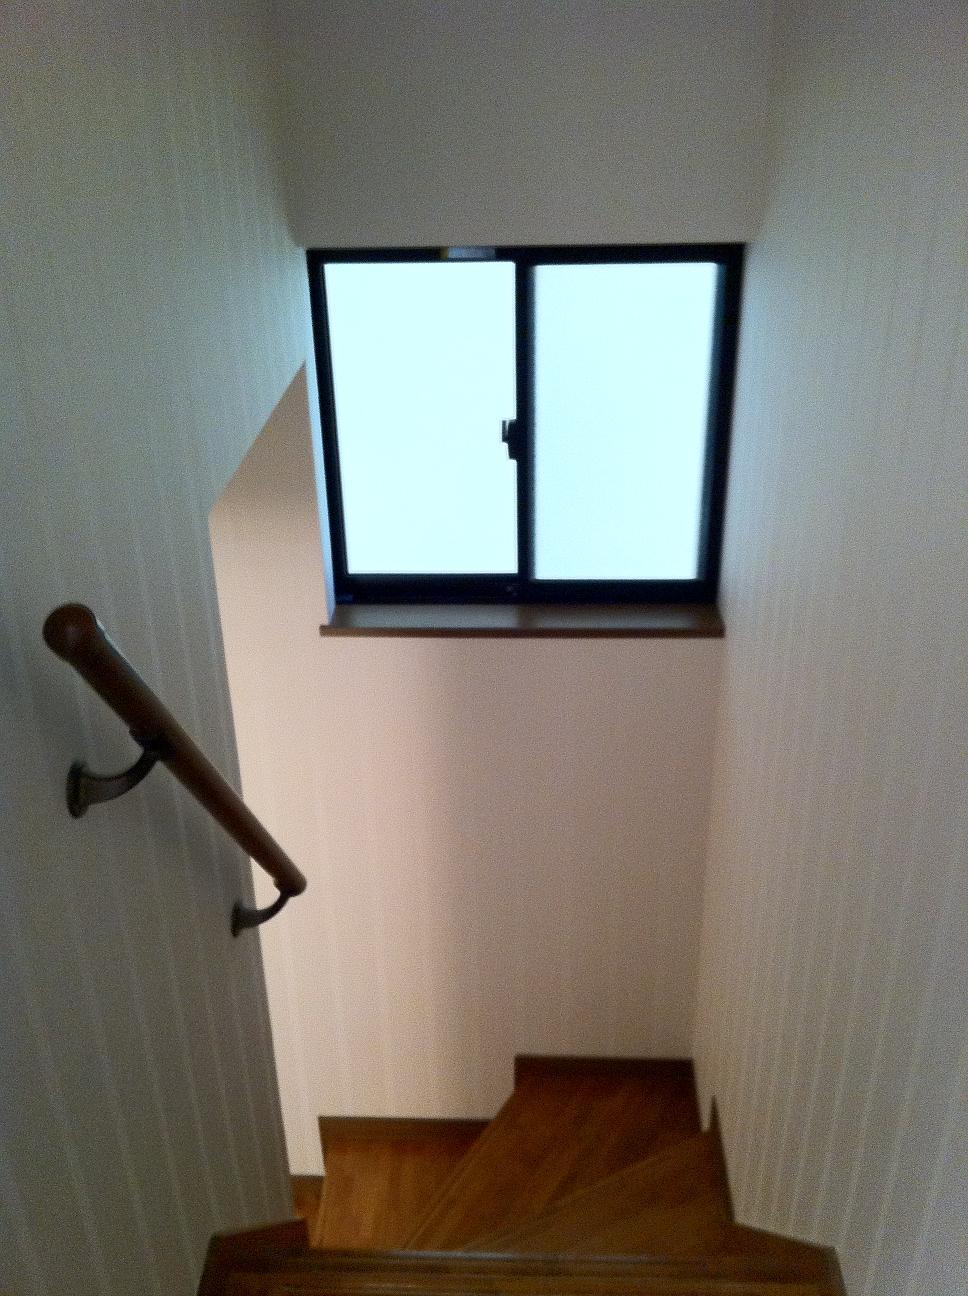 Other introspection. There is a window on the staircase landing